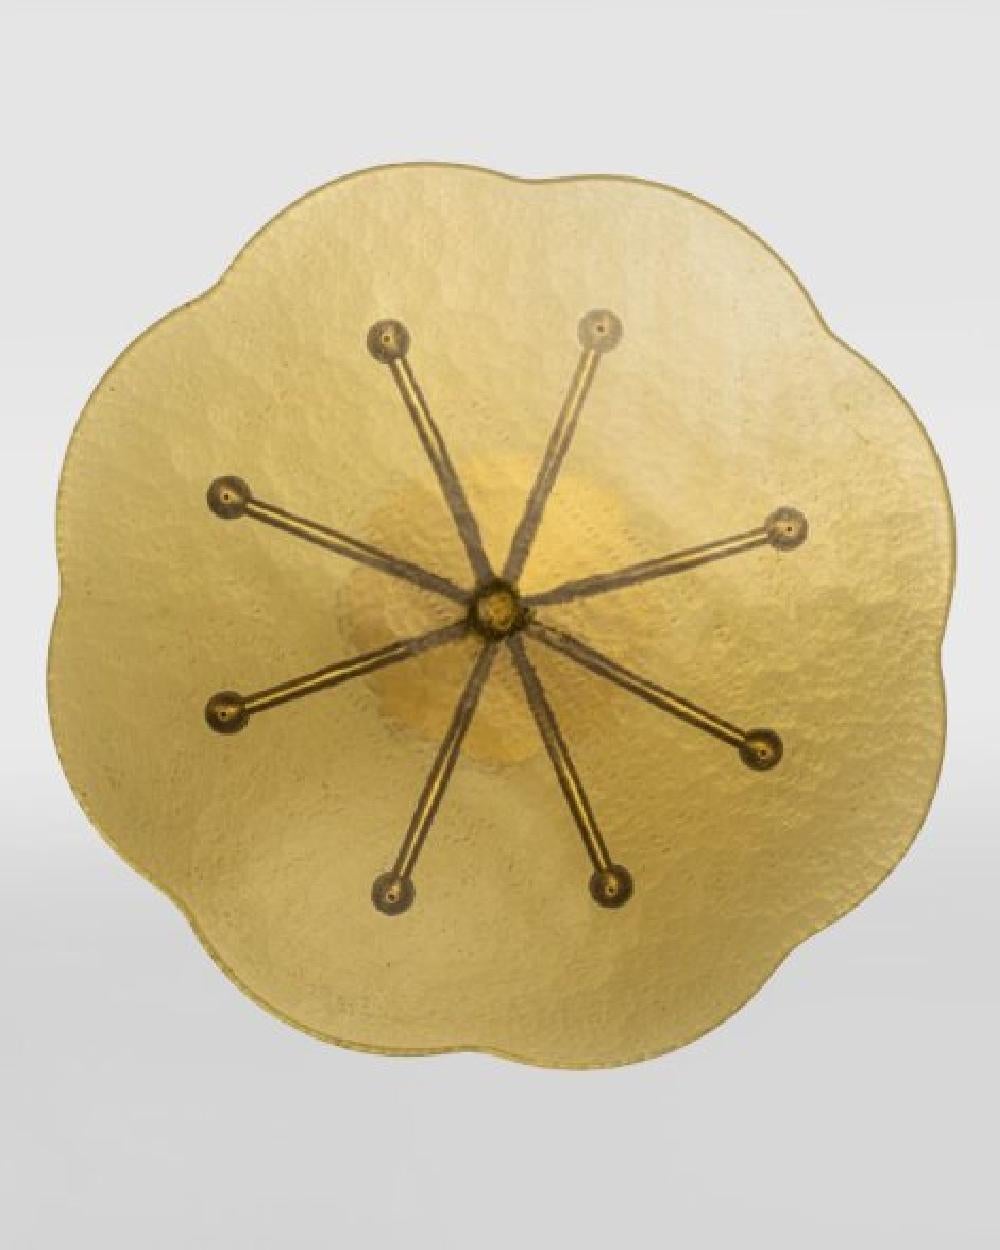 Inspired by India Mahdavi’s obsession for flowers, Pistil’s stylised form showcases the designer’s iconic flair. The surface is made of a single piece of handmade cast glass – an impressive and highly-skilled process giving the table its uniquely